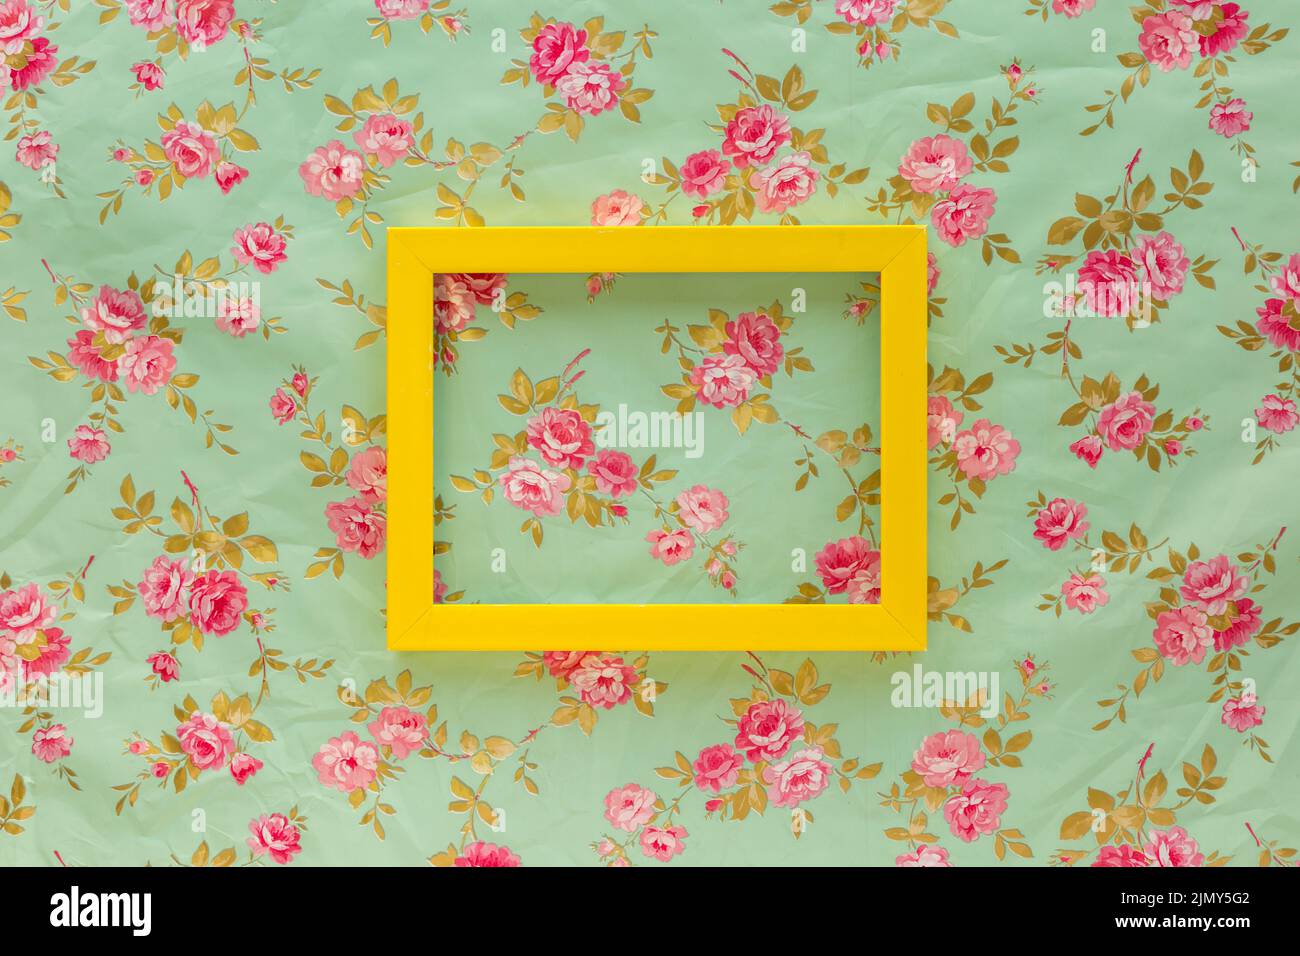 High angle view yellow empty frame against floral print background Stock Photo